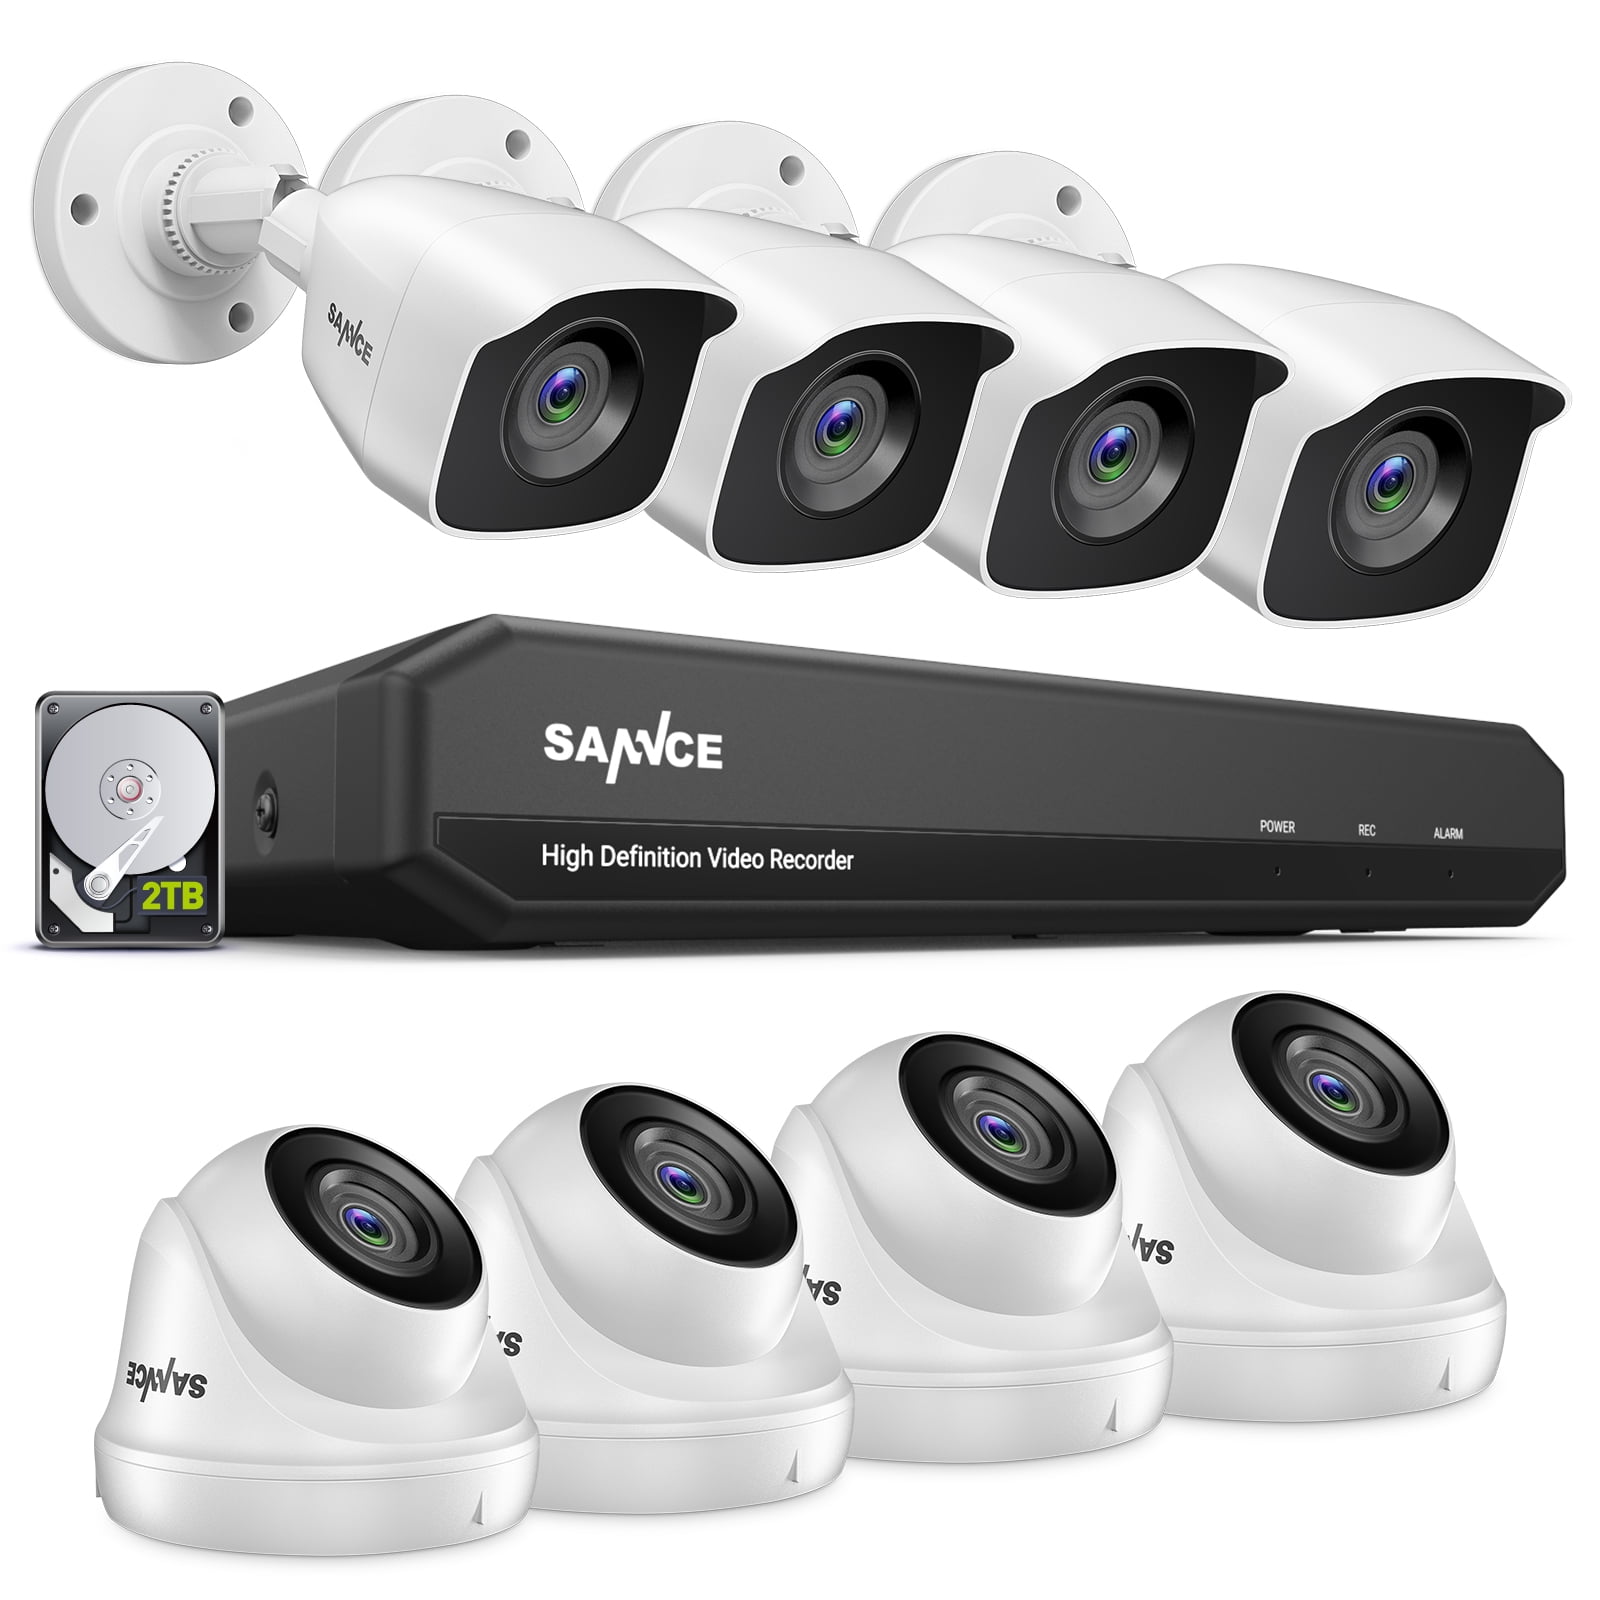 SANNCE Security Camera System CCTV, 8 Channel 5-in-1 DVR with 2TB,8 Wired 1080p HD Surveillance Cameras,Indoor Outdoor Cameras with Night Vision